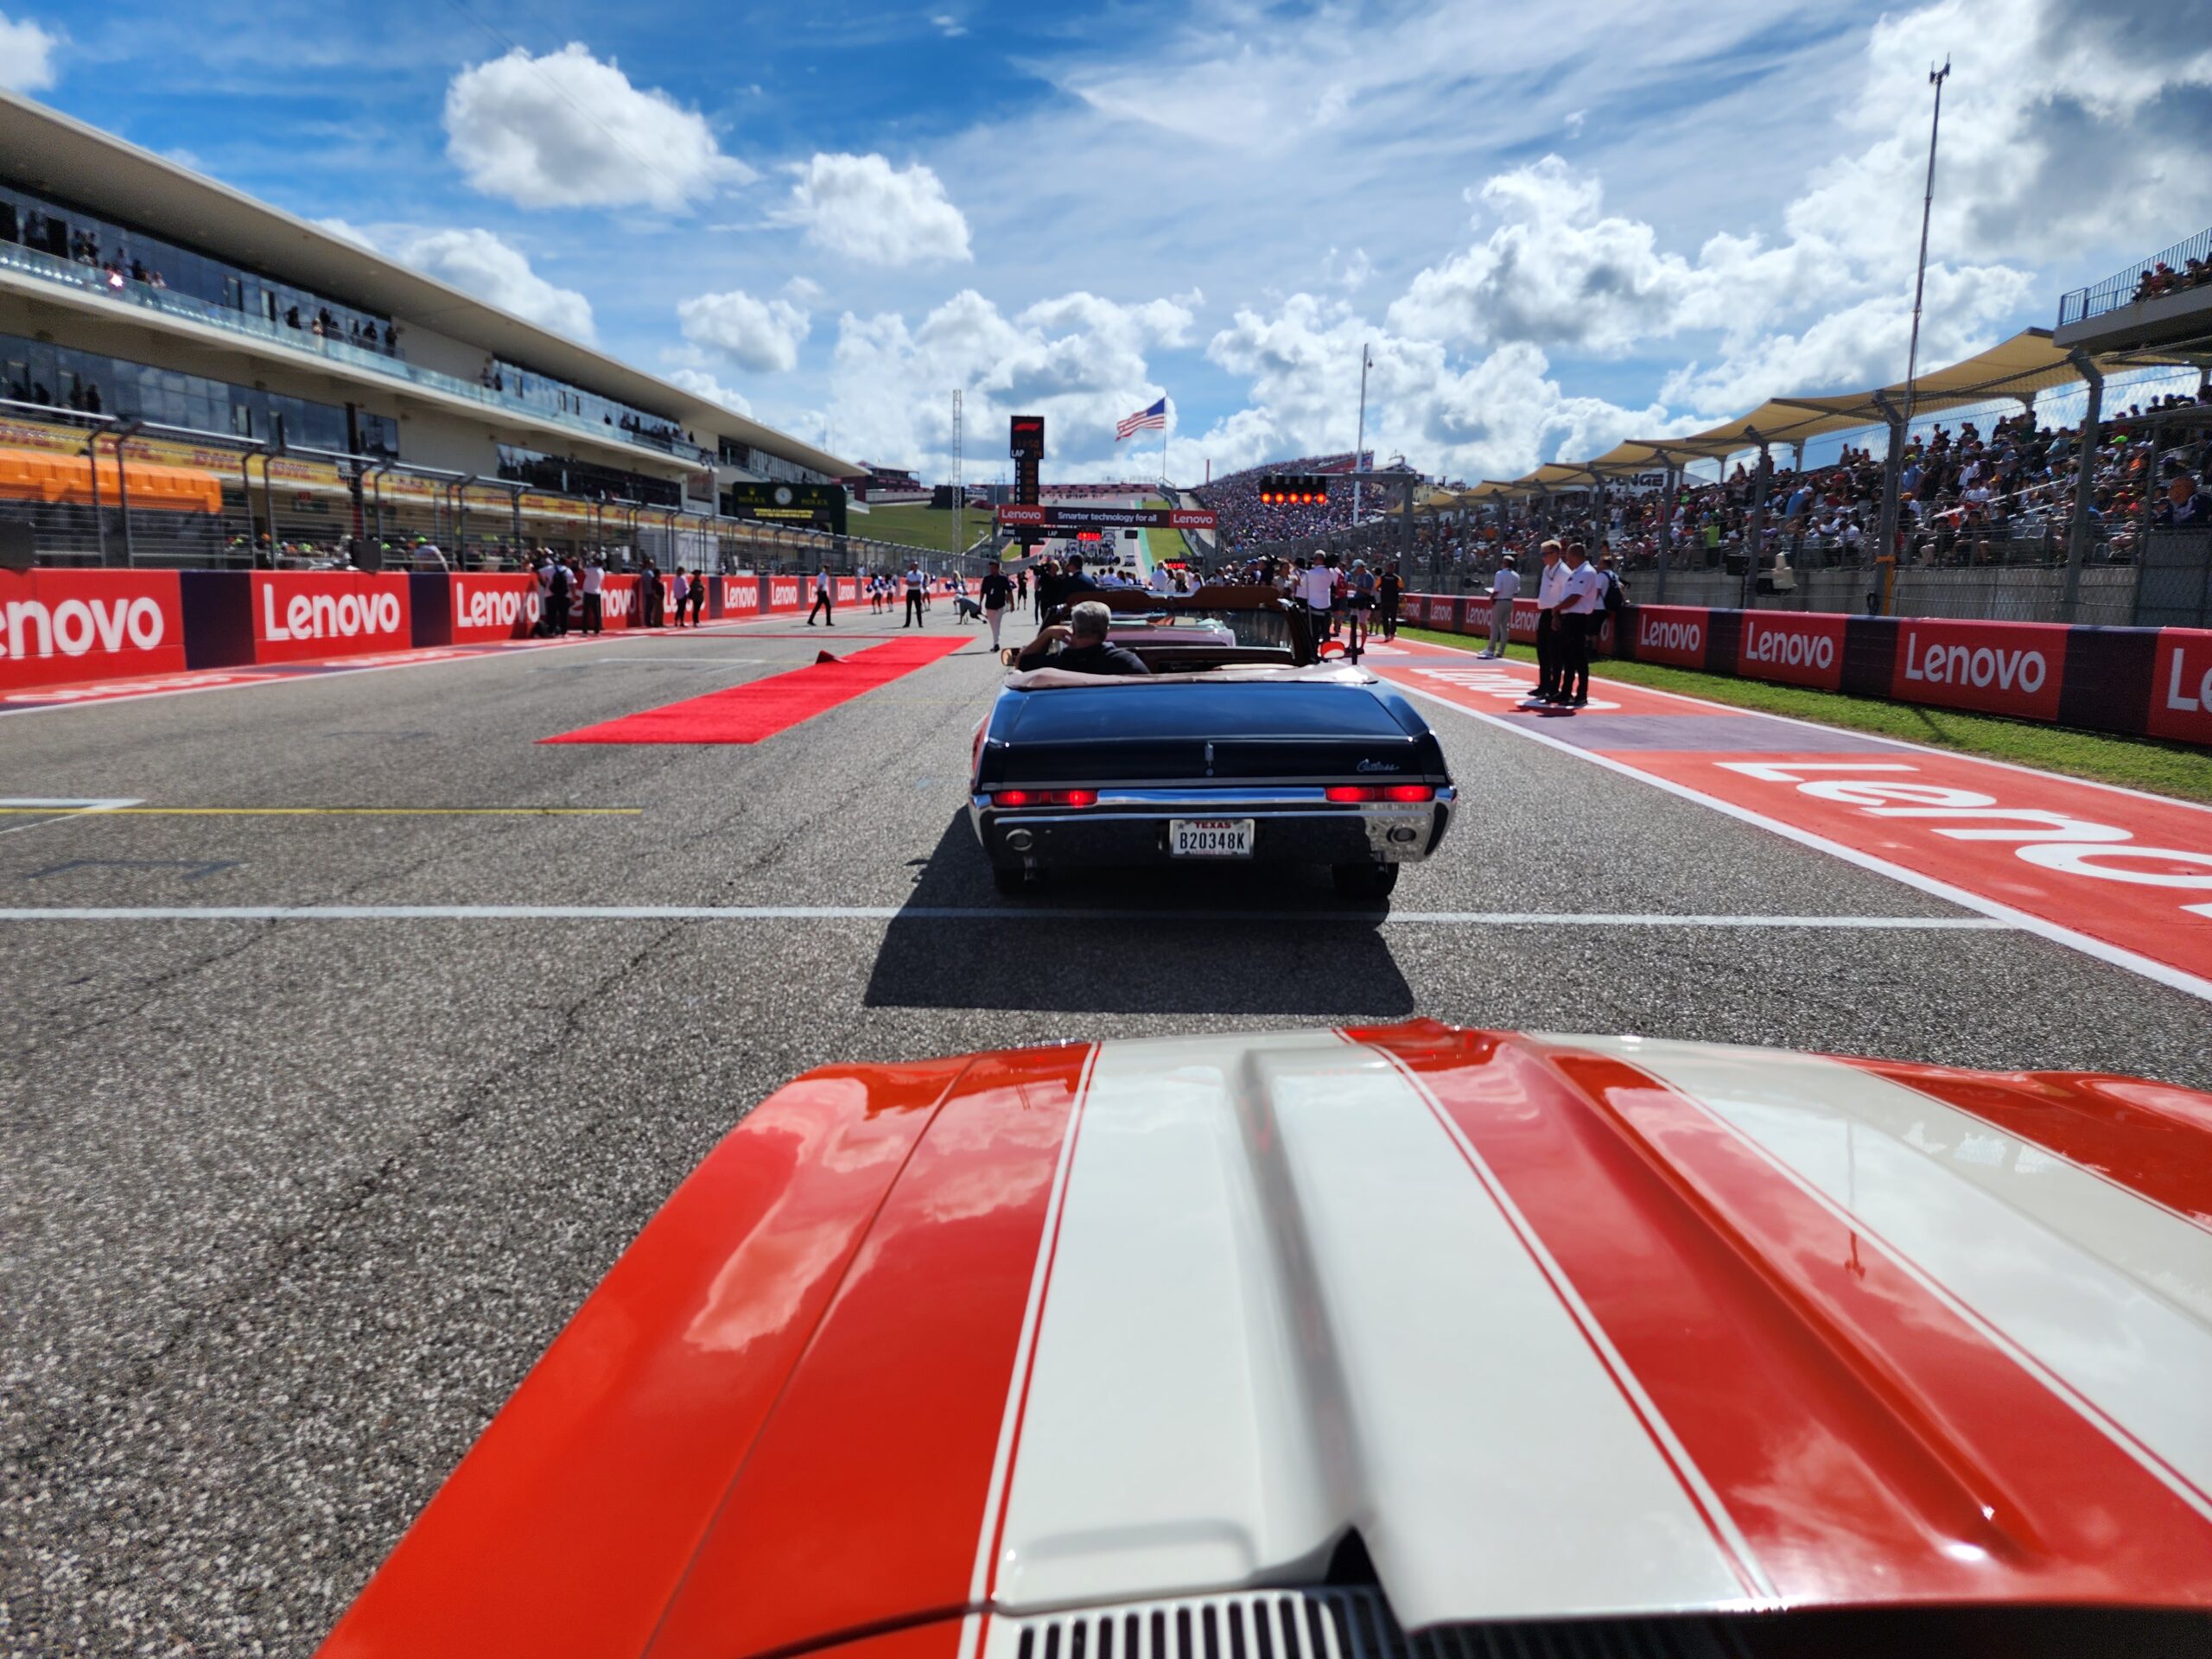 Classic car on a race track with spectators and racing crew in the background, highlighting the adventurous spirit sought after by Austin Realtor clients in home buying.